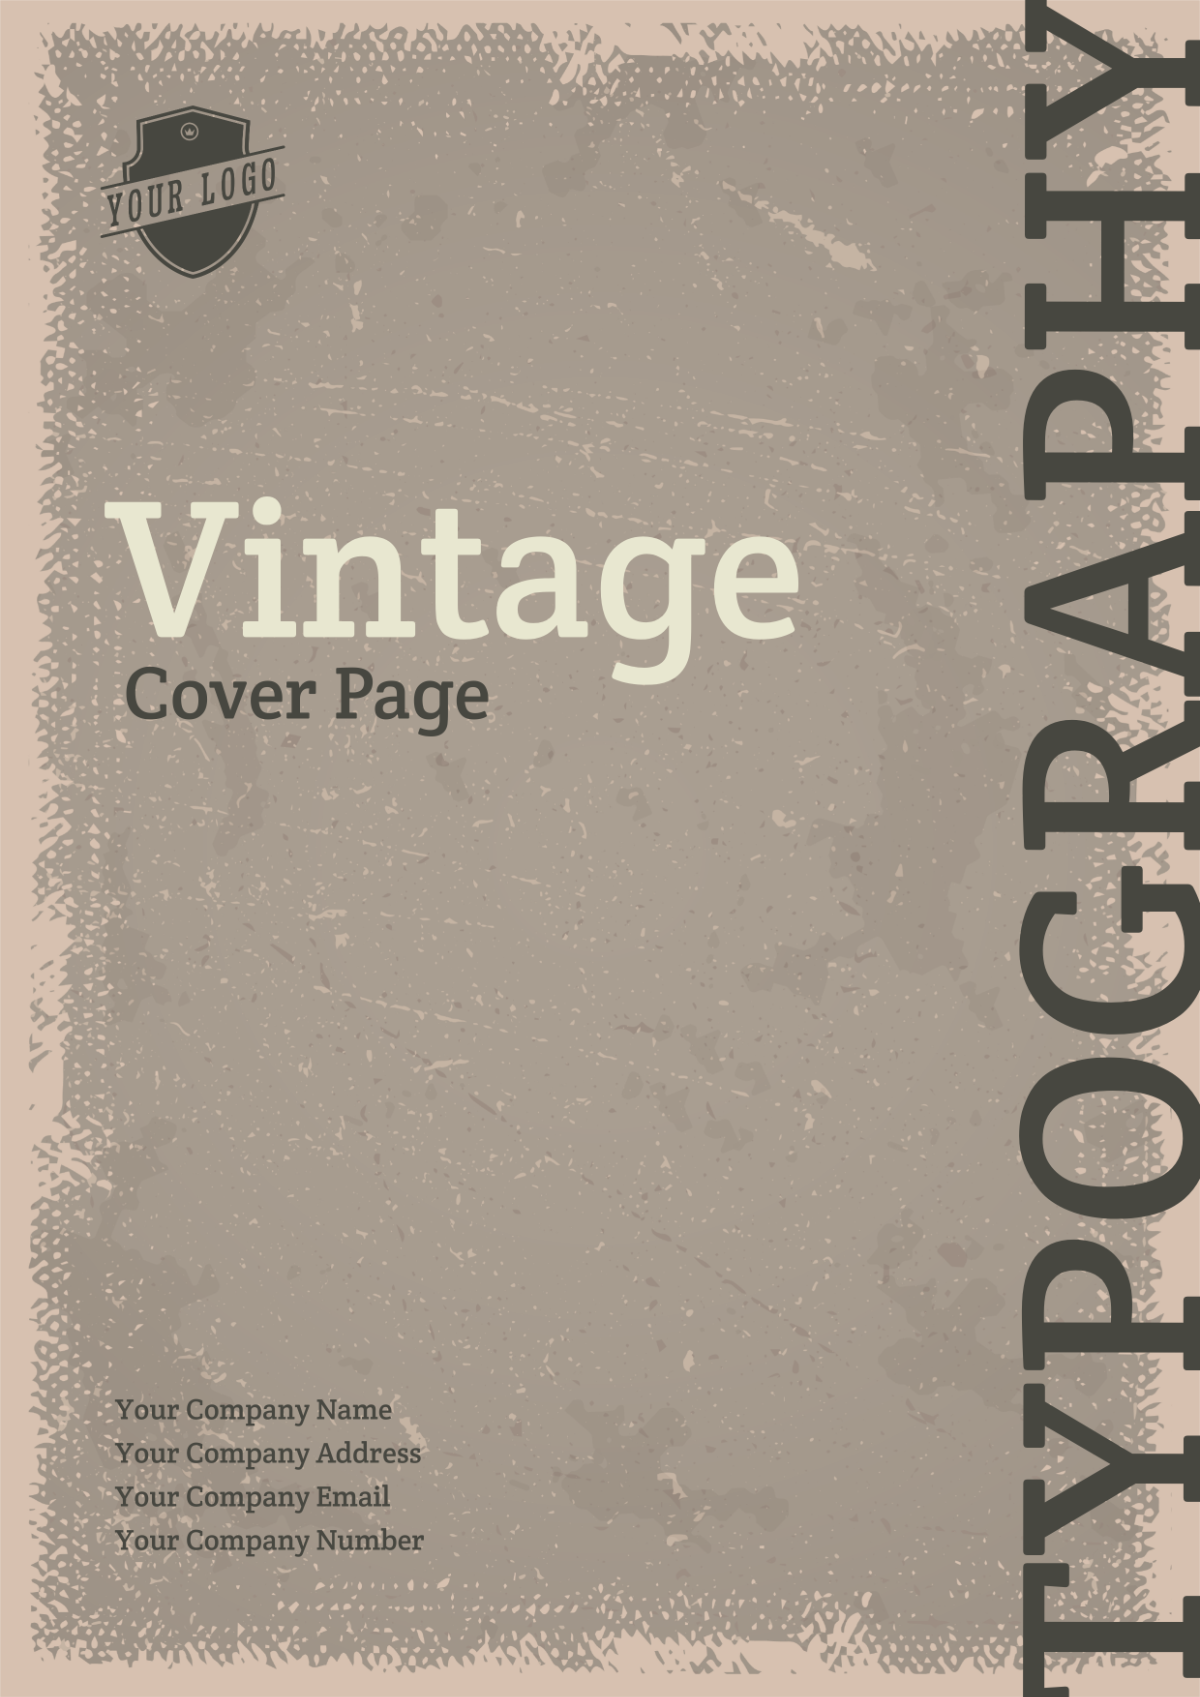 Vintage Typography Heading Cover Page